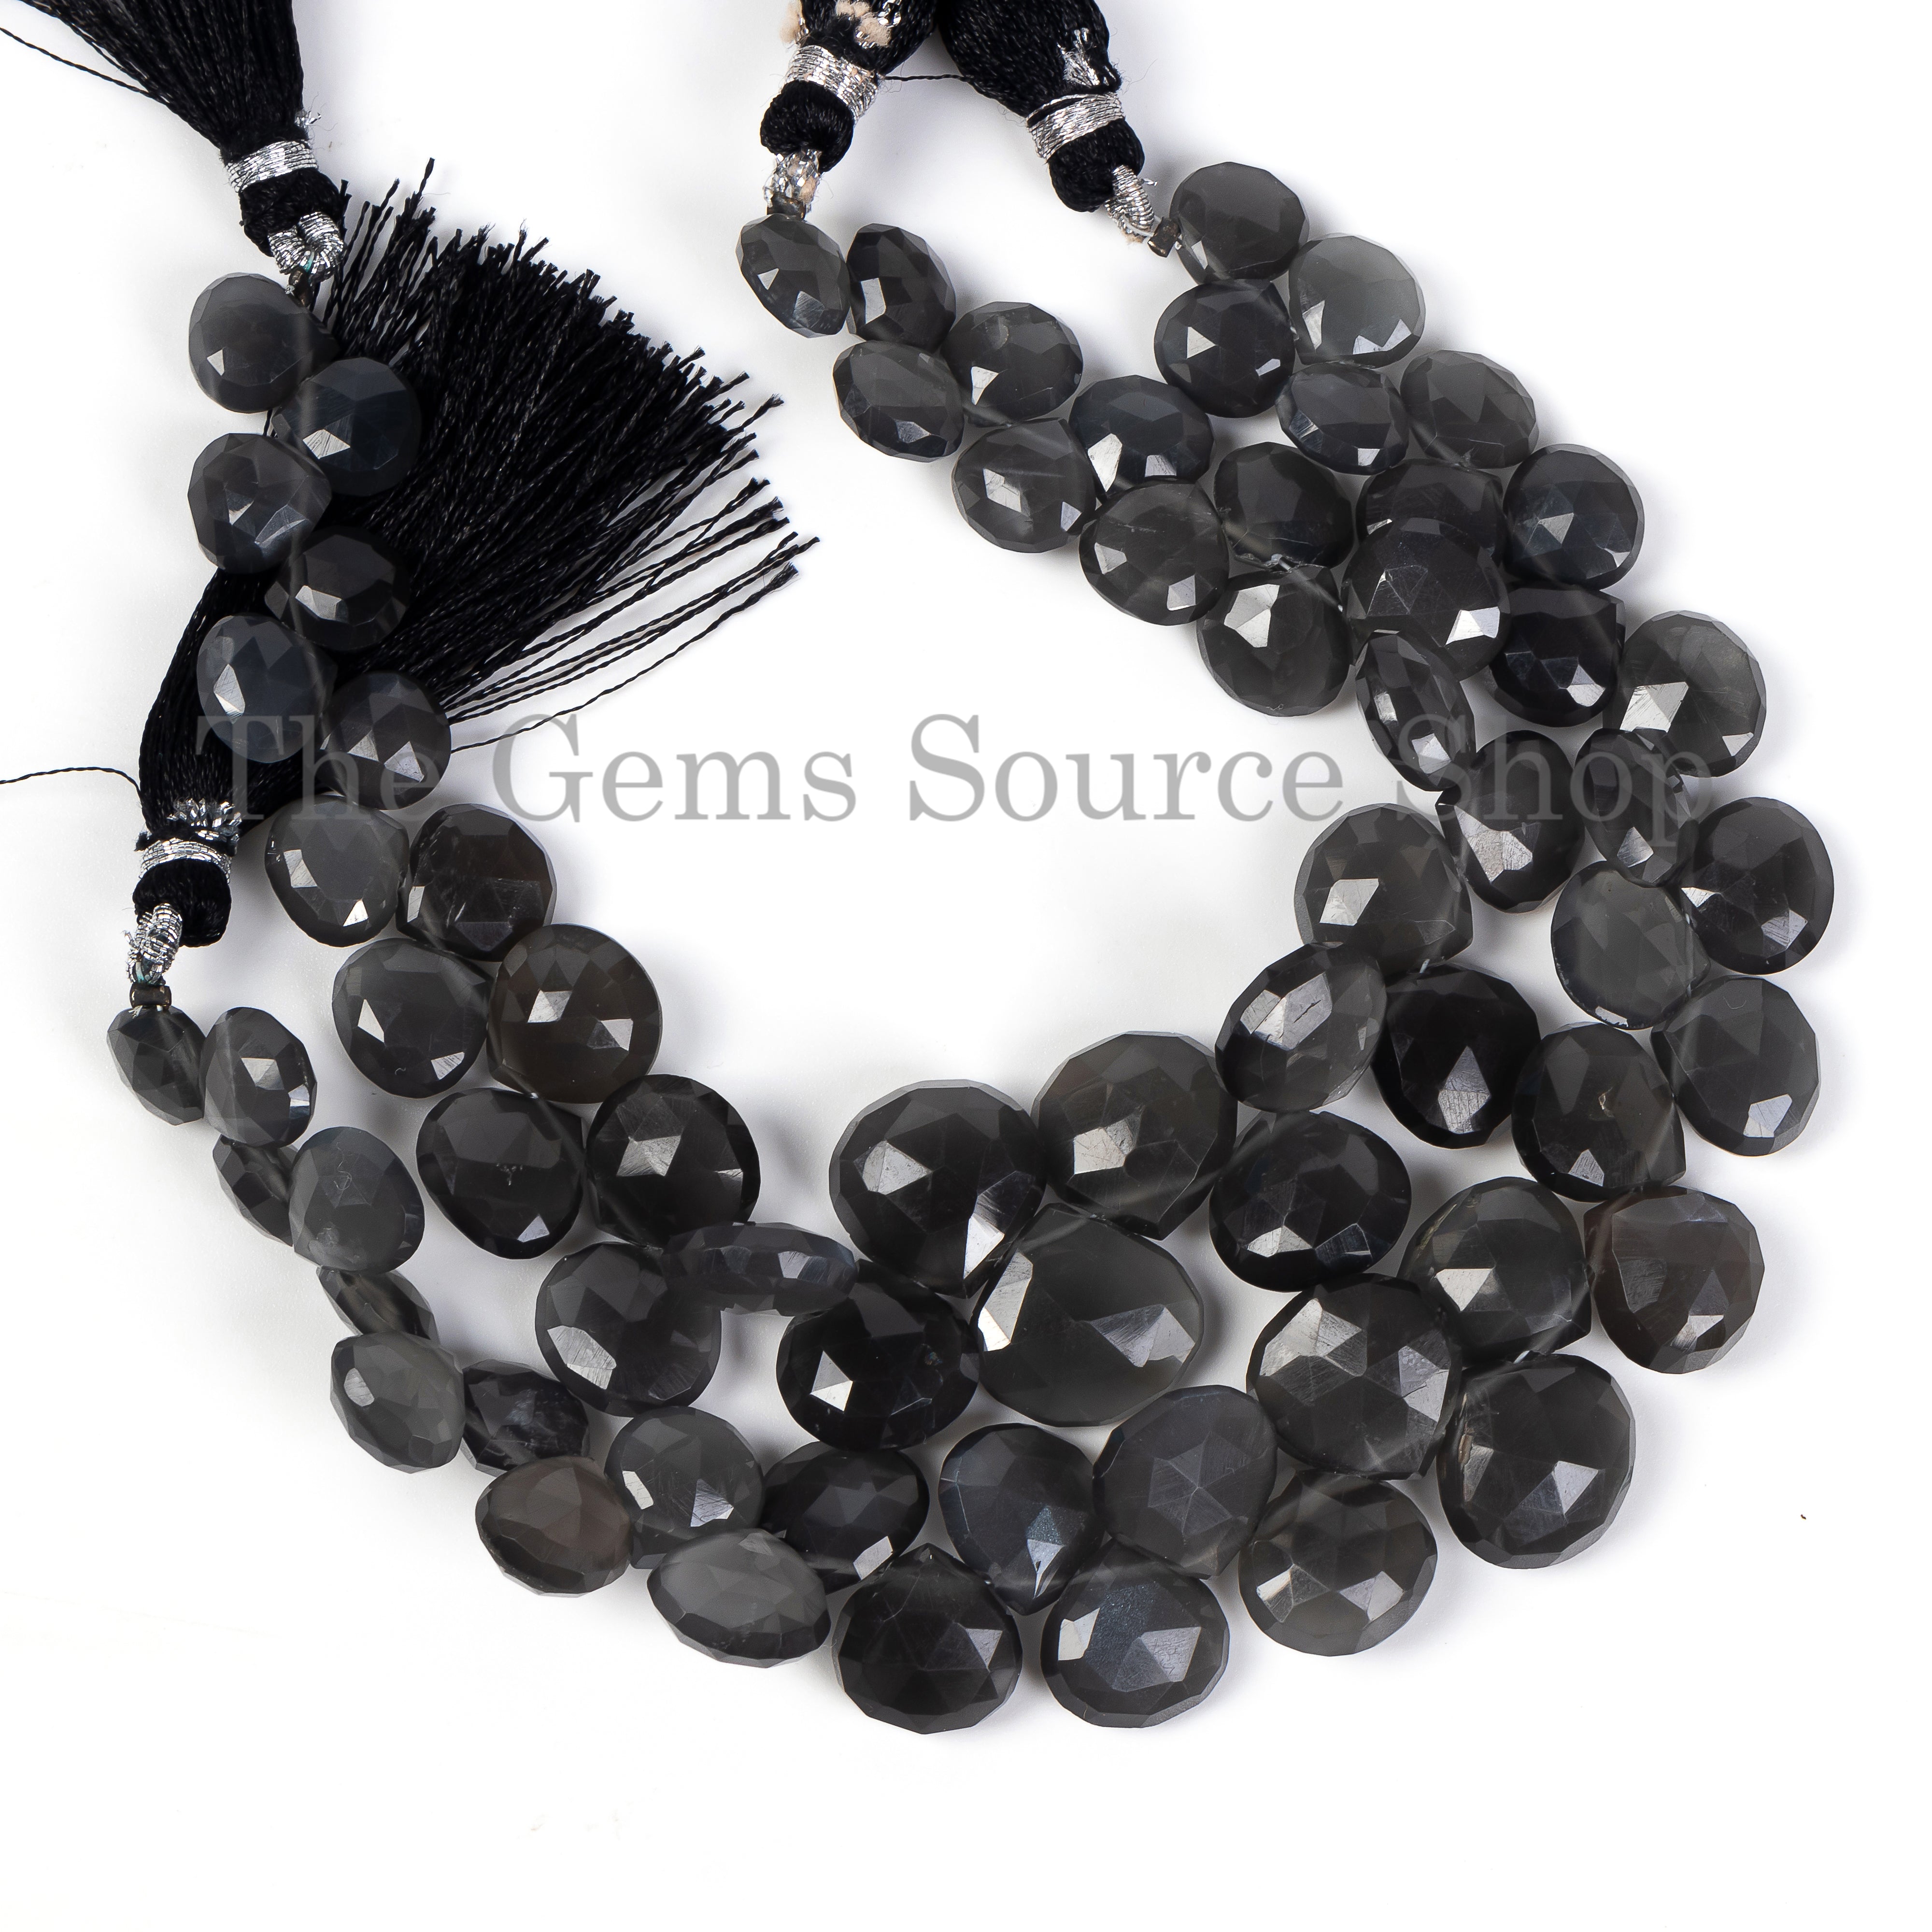 Natural Moonstone Heart Shape Beads, Gray Moonstone Faceted Gemstone Beads for Jewelry Making. TGS-5094